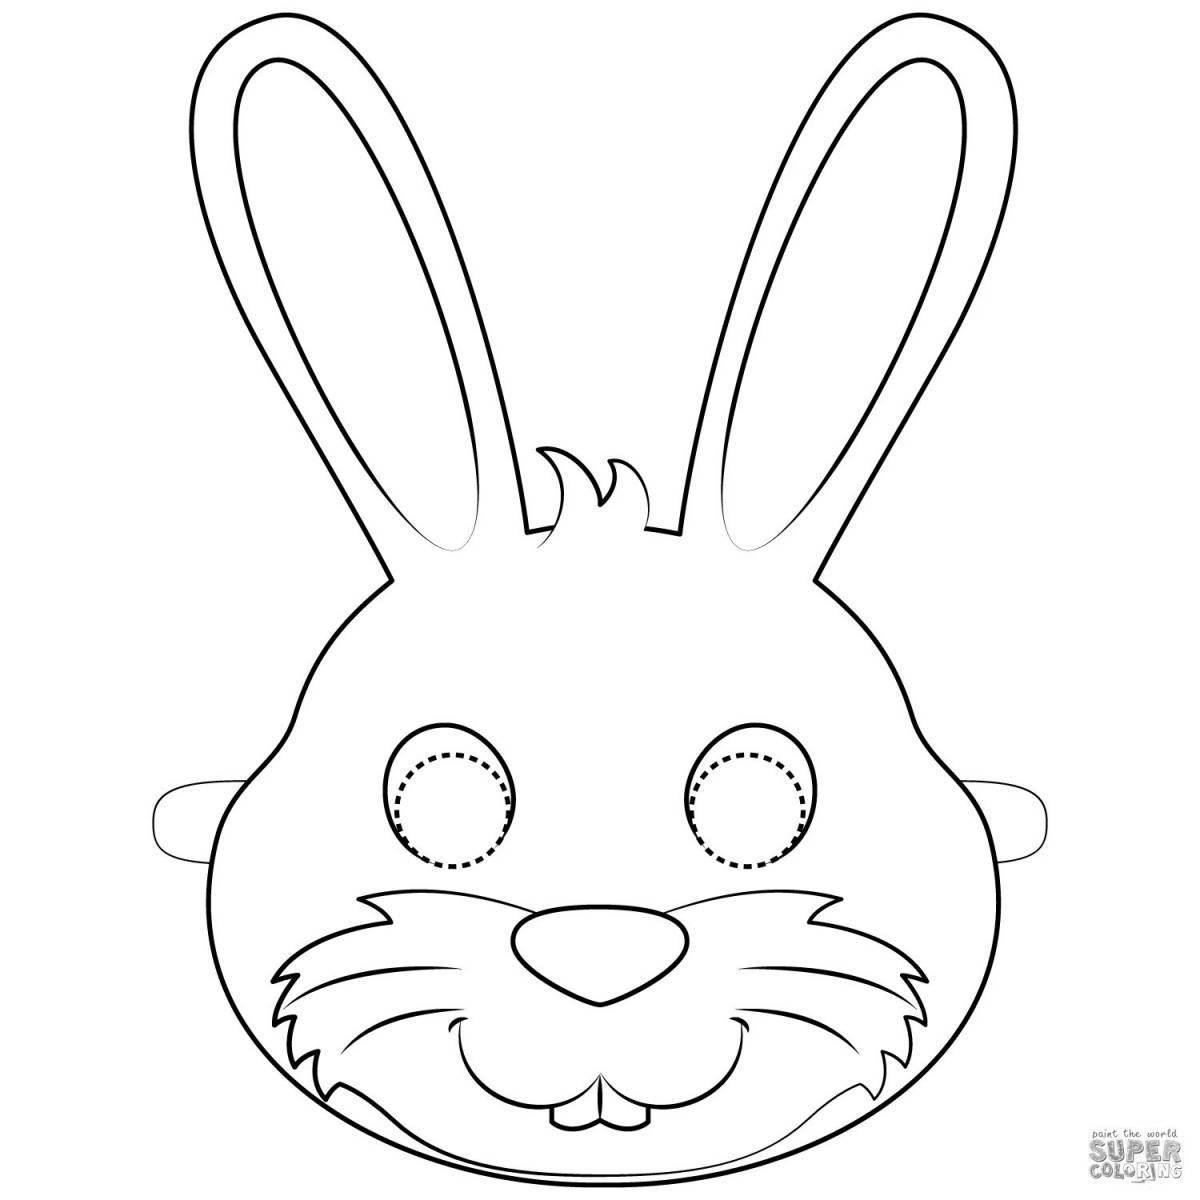 Crazy Bunny mask coloring page